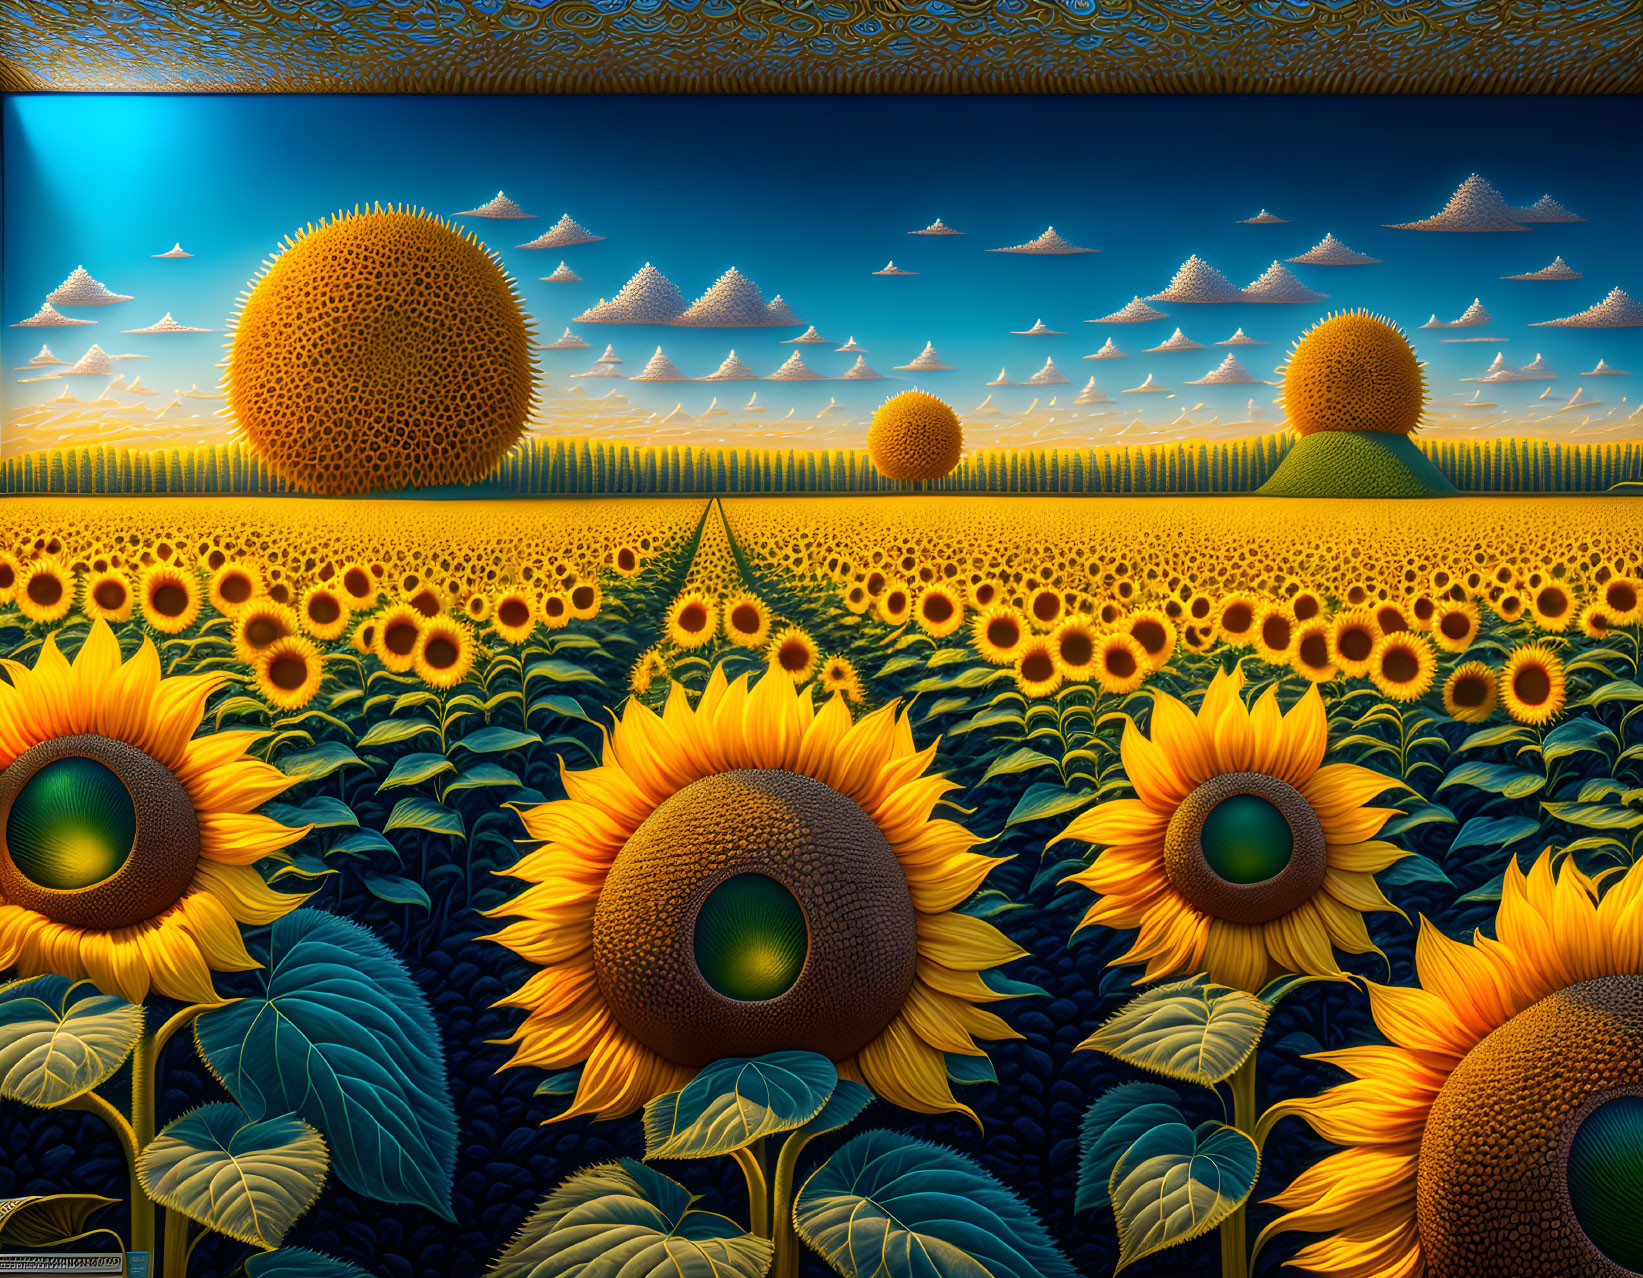 Sunflower Field Under Blue Sky with Setting or Rising Sun